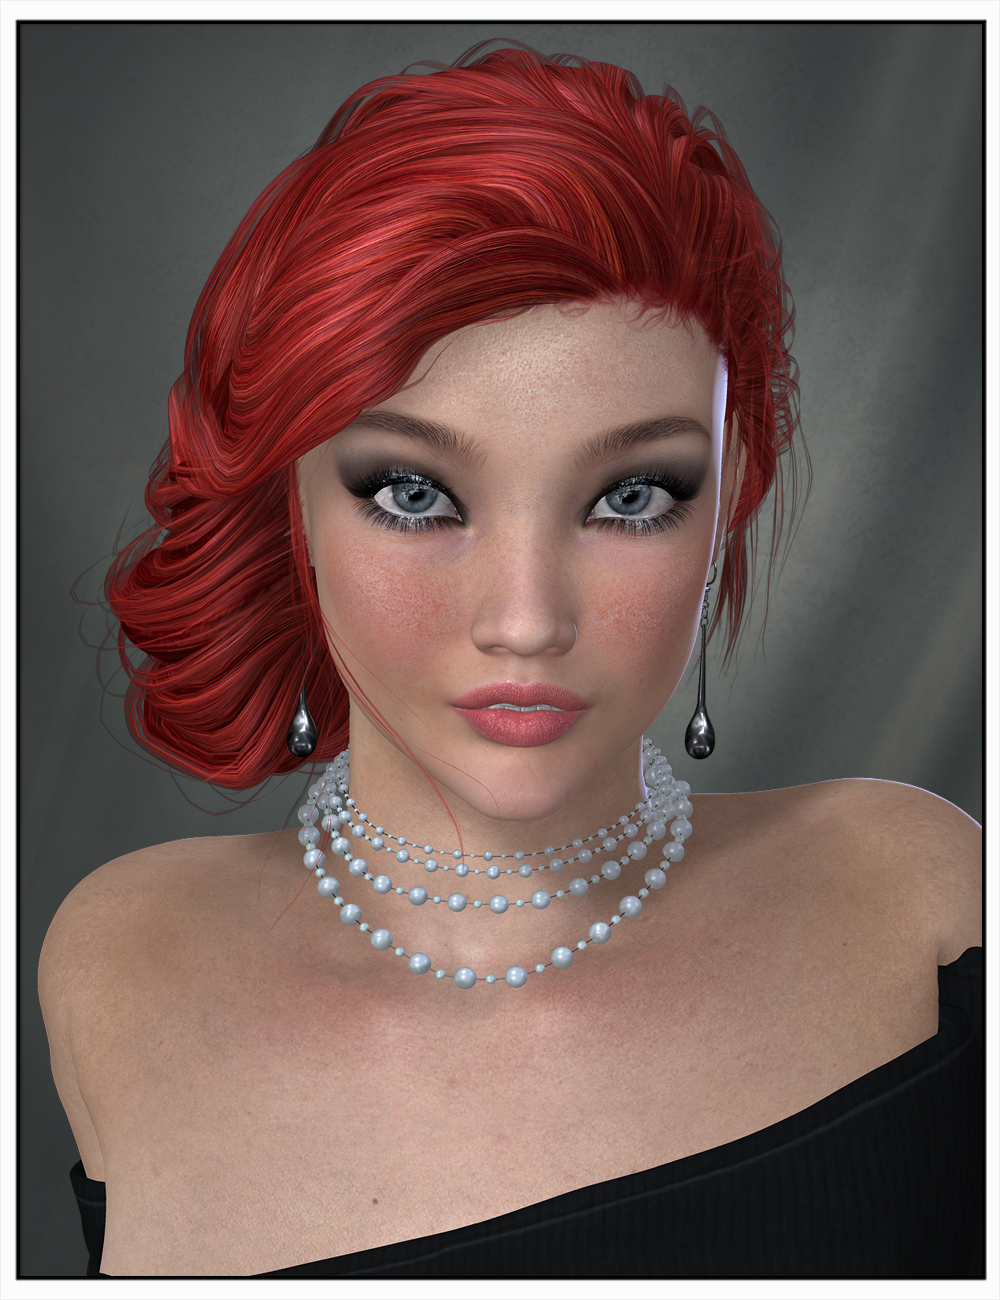 Baroness Hair Colors by: SWAM, 3D Models by Daz 3D